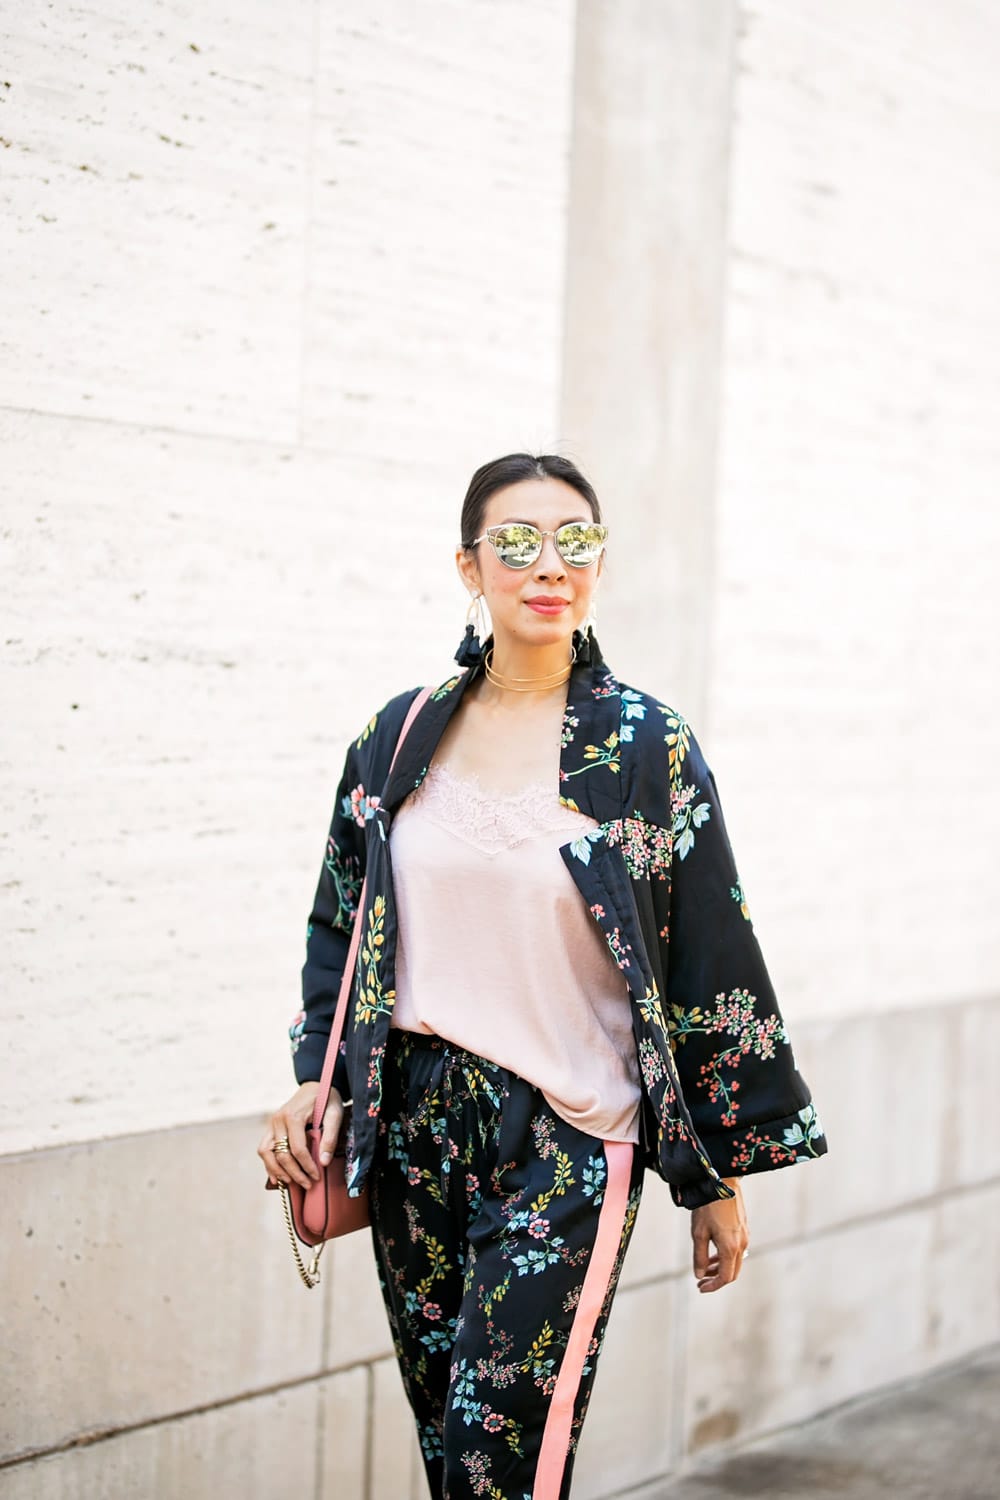 wear who what wear collection floral kimono pajama set baublebar tassel earrings pink lace cami 